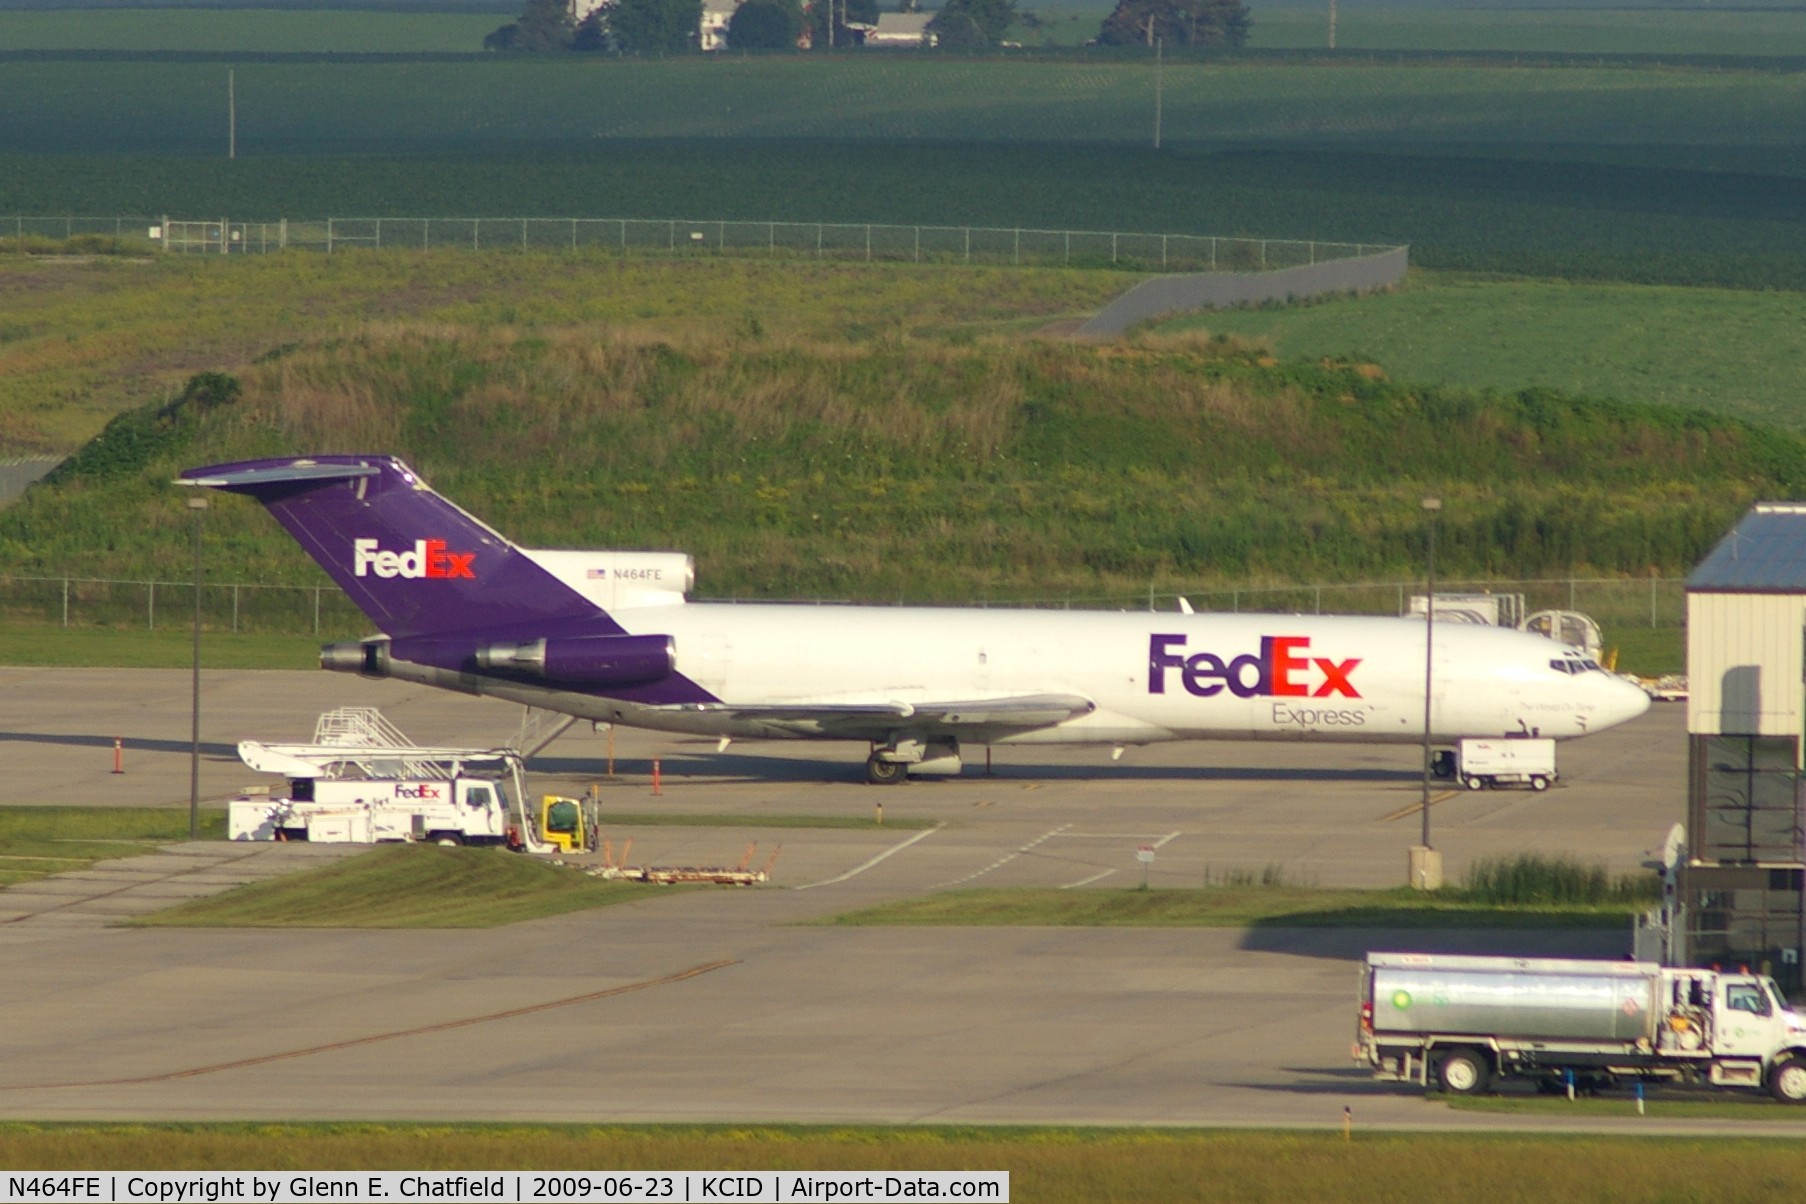 N464FE, 1976 Boeing 727-225 C/N 21288, Parked at the FedEx ramp, seen from the tower about 3/4 mile away.